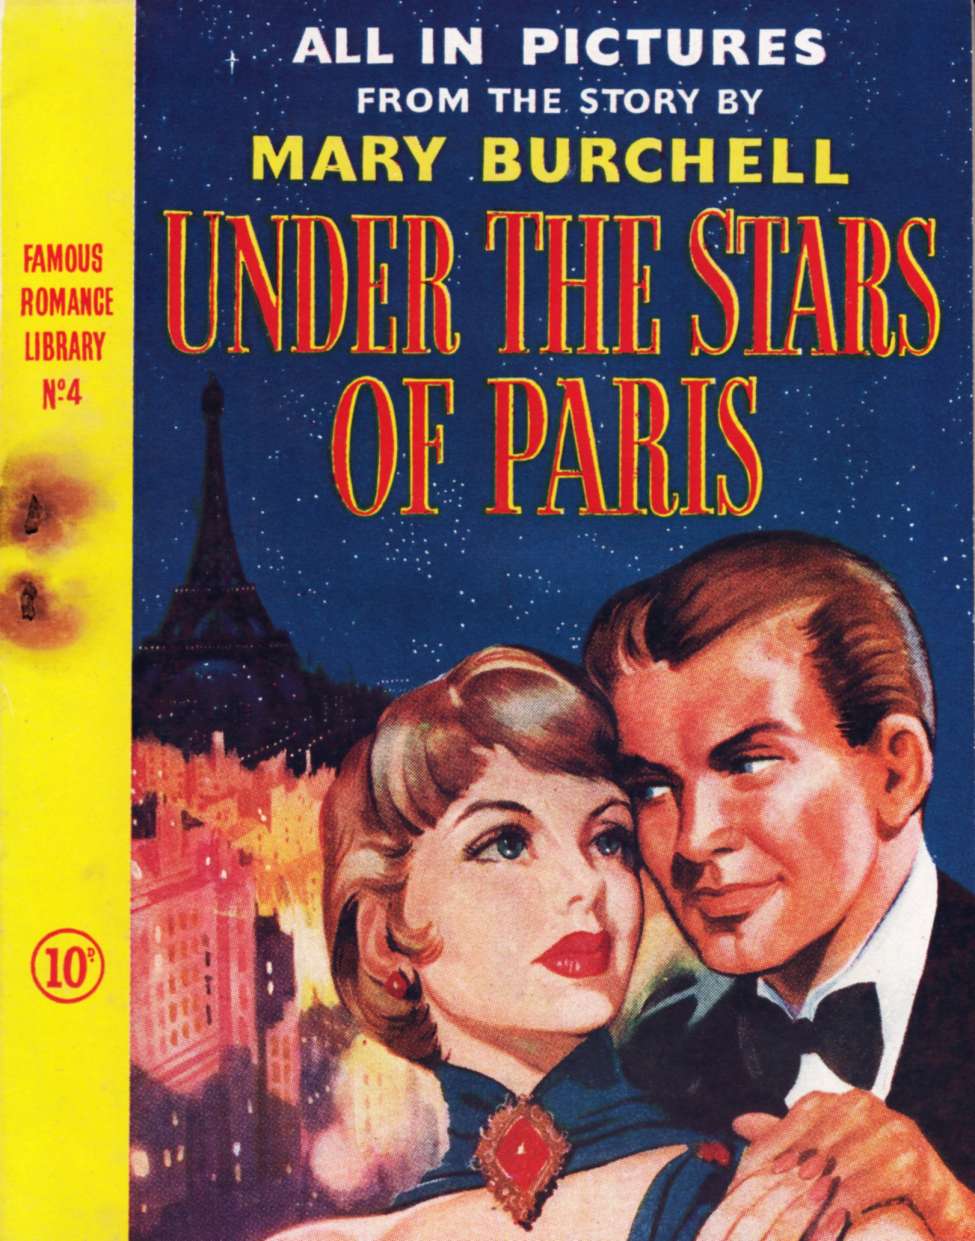 Book Cover For Famous Romance Library 4 - Under the Stars of Paris